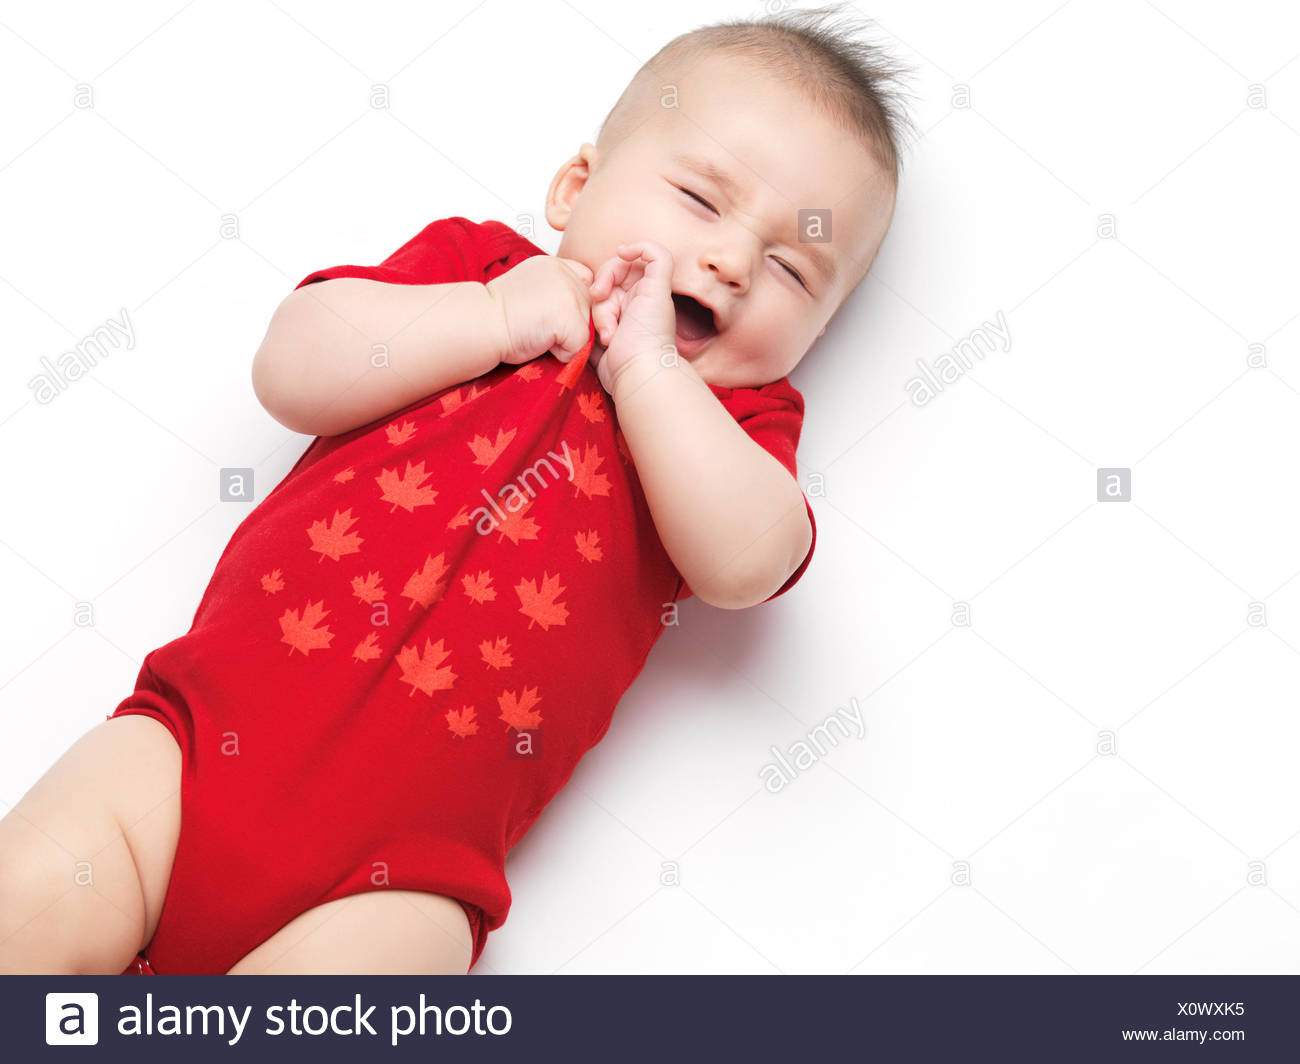 Baby boy, four months, wearing red romper suit Stock Photo - Alamy